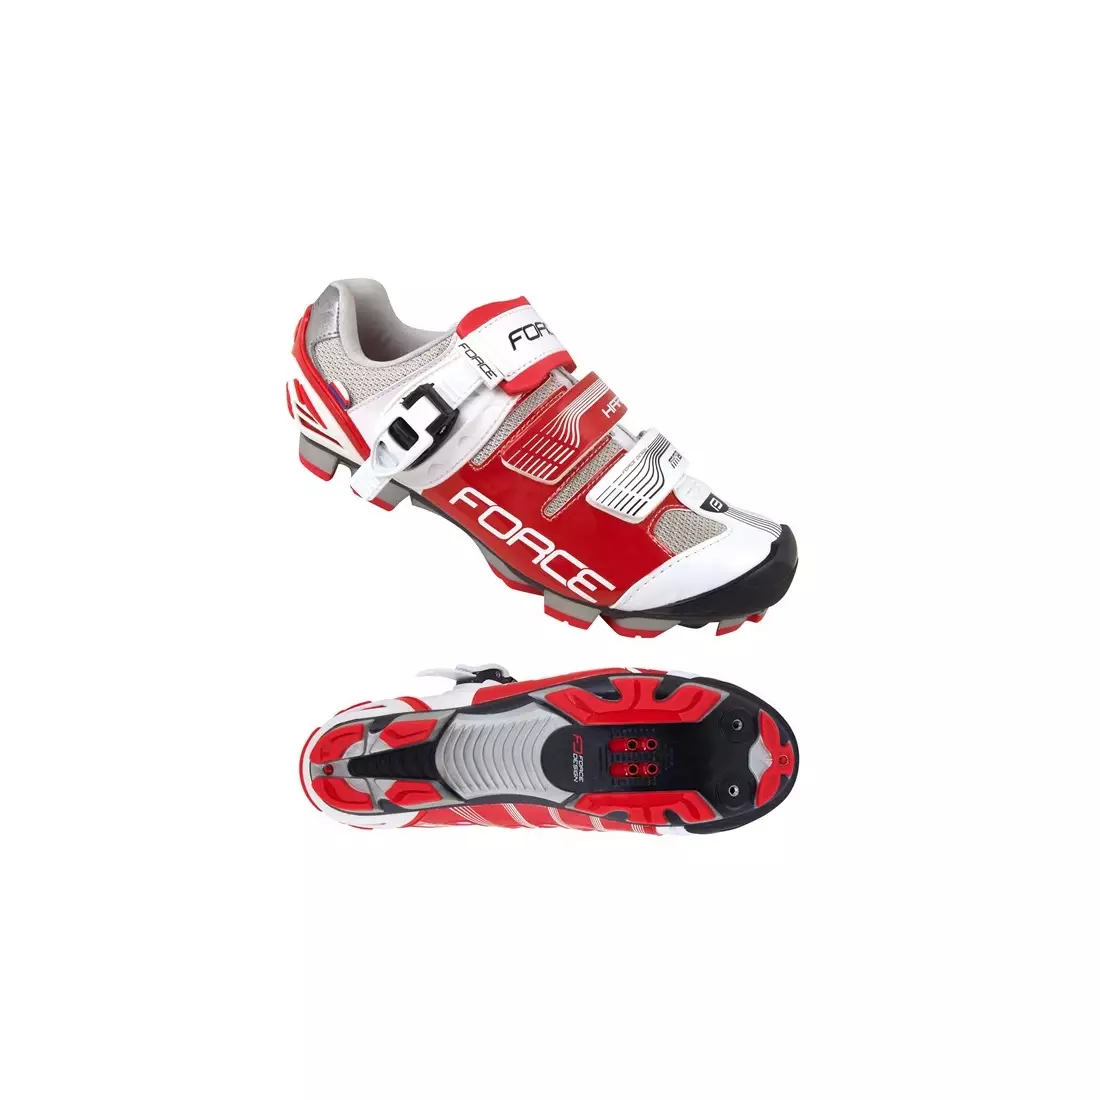 FORCE MTB HARD cycling shoes 94062 white and red